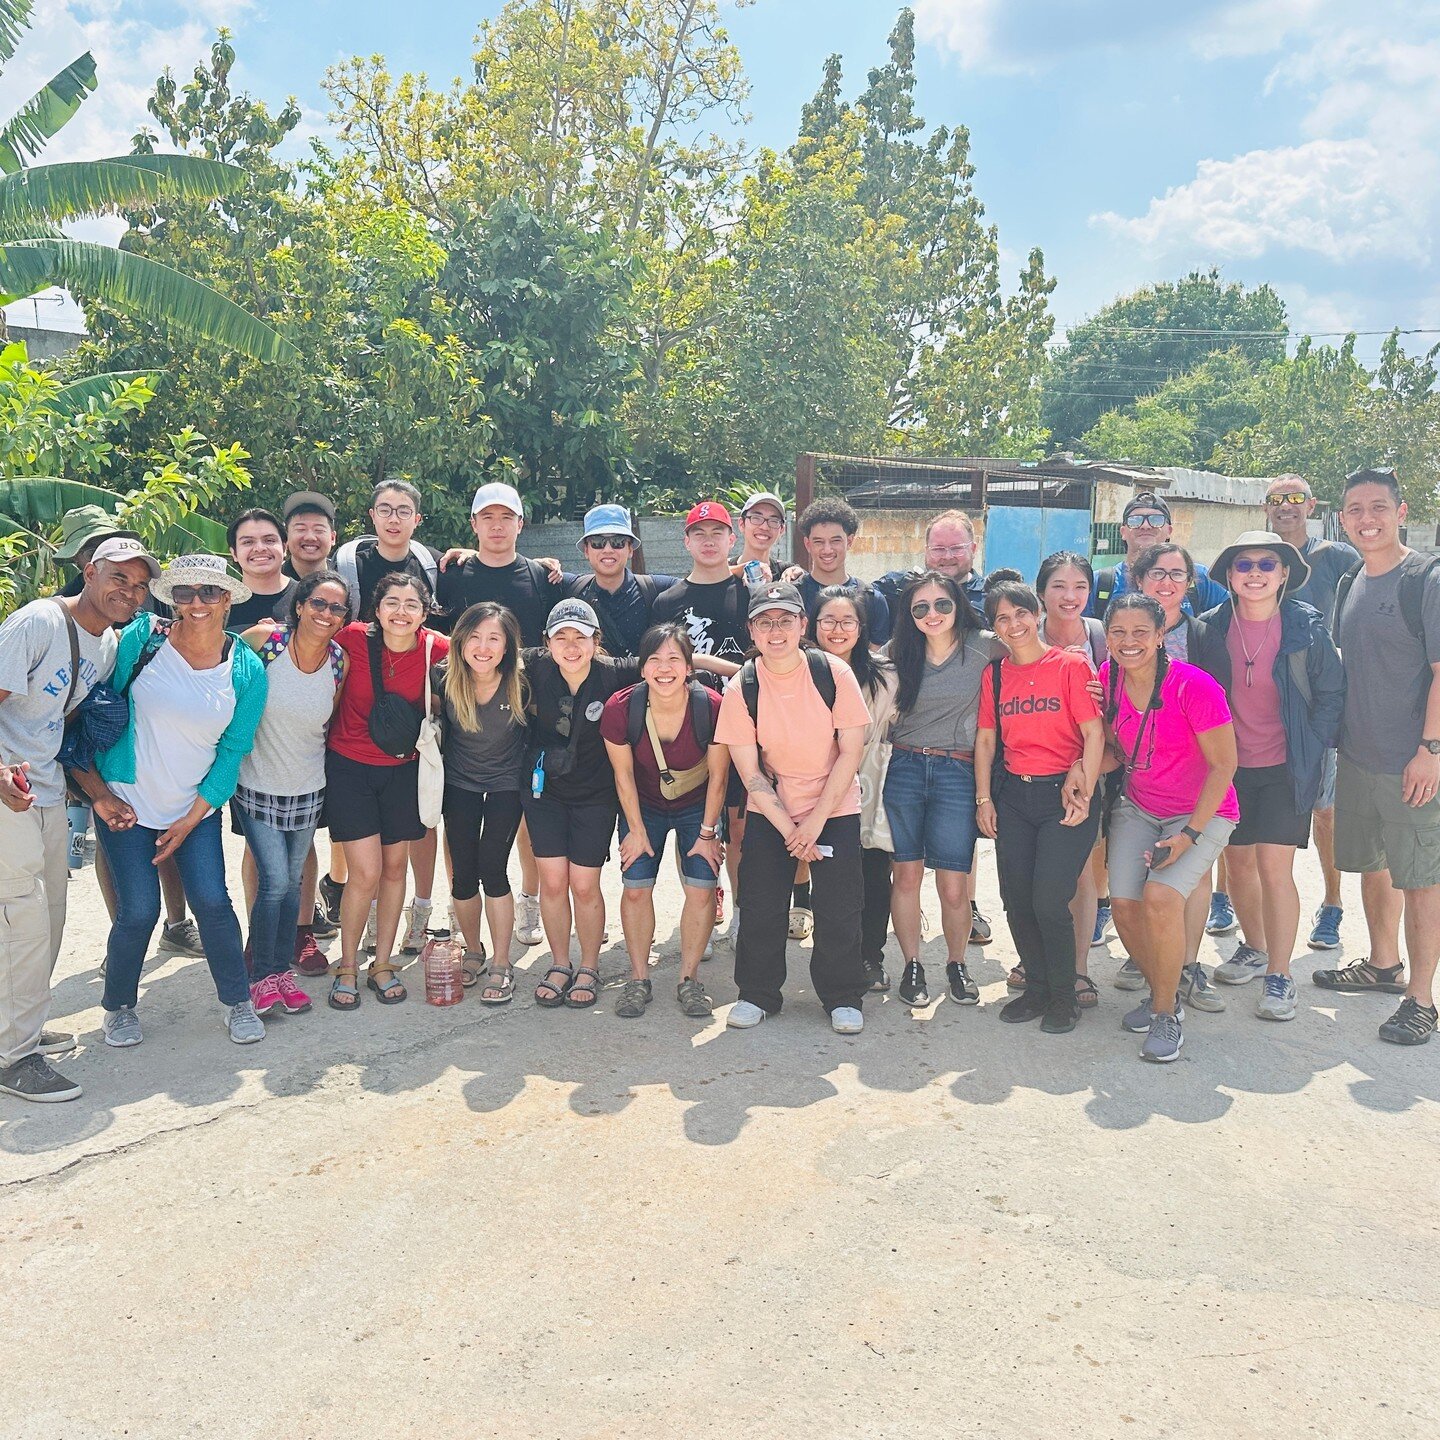 🇨🇺 grateful for the chance to distribute filters for clean water and share the gospel in Cuba this spring break! thanks @filterofhope for making all this possible!

praise the Lord for all that we've been able to experience in the short few days &a